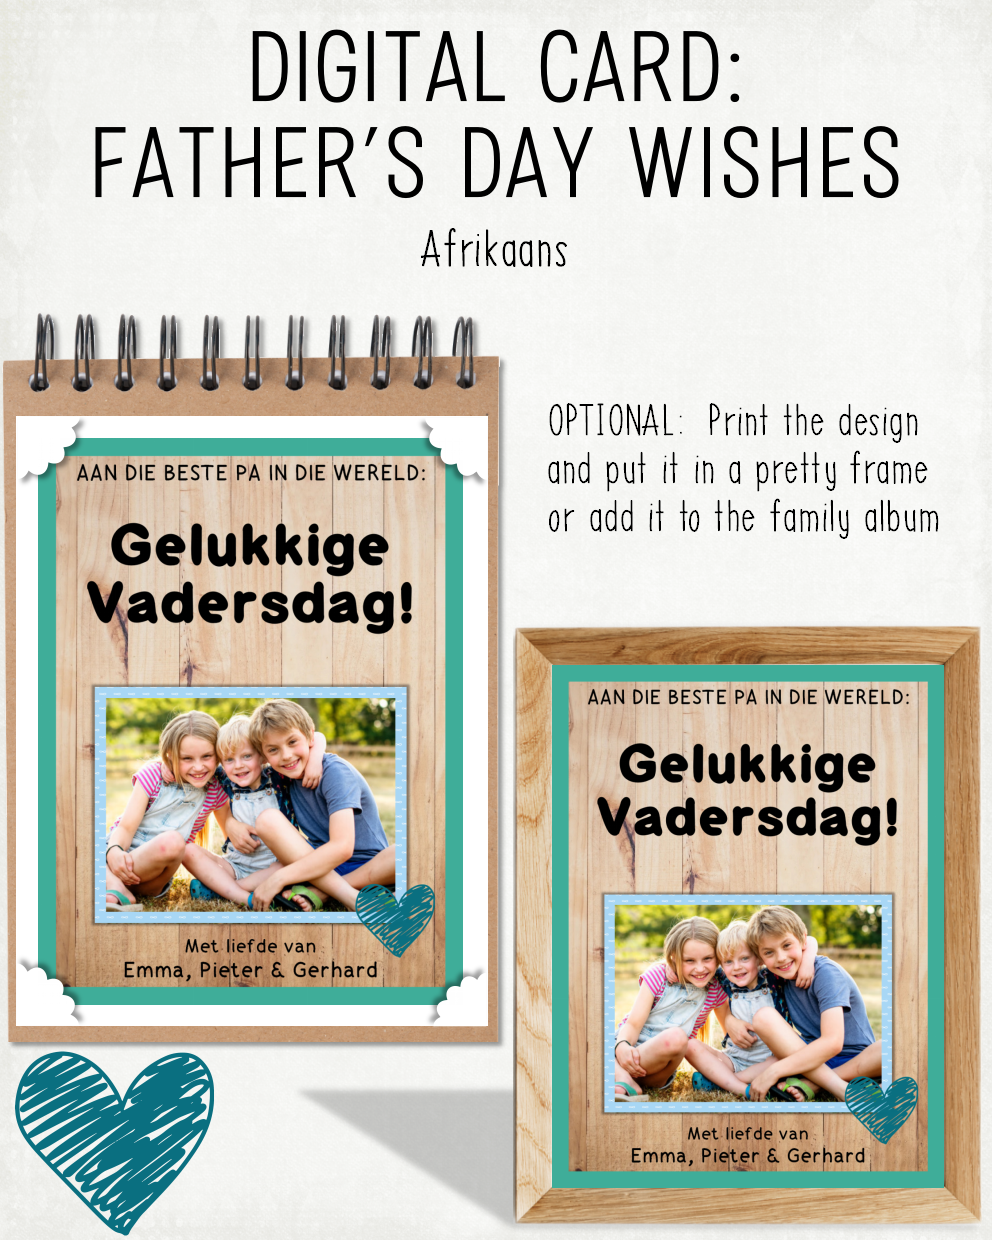 DIGITAL CARD: Father's Day Wishes (Afrikaans)